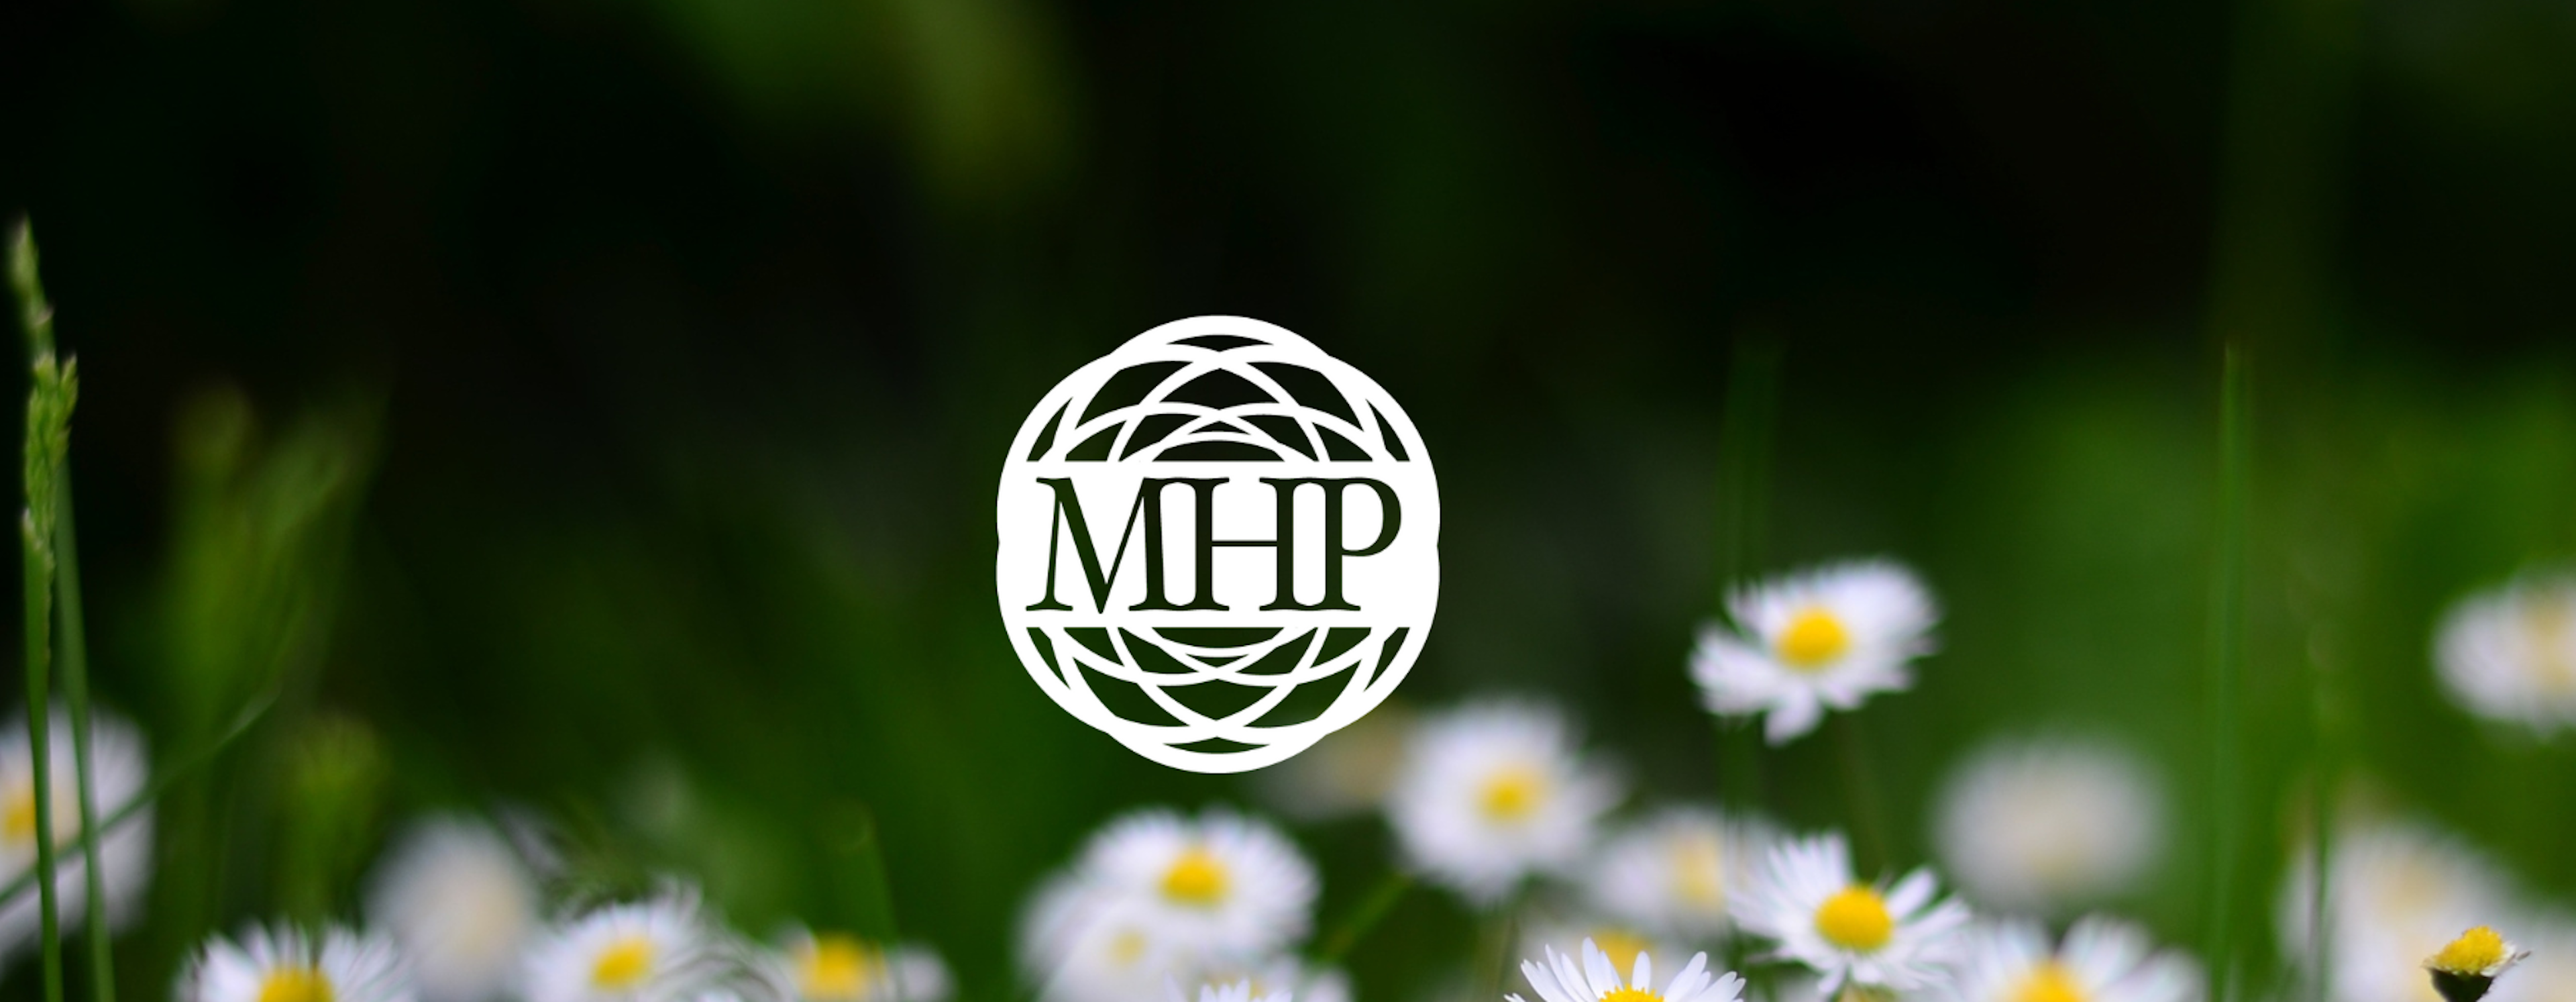 5 Tips for Managing Depression Blurred Photo of White Daisies and White Mhp Logo (1)